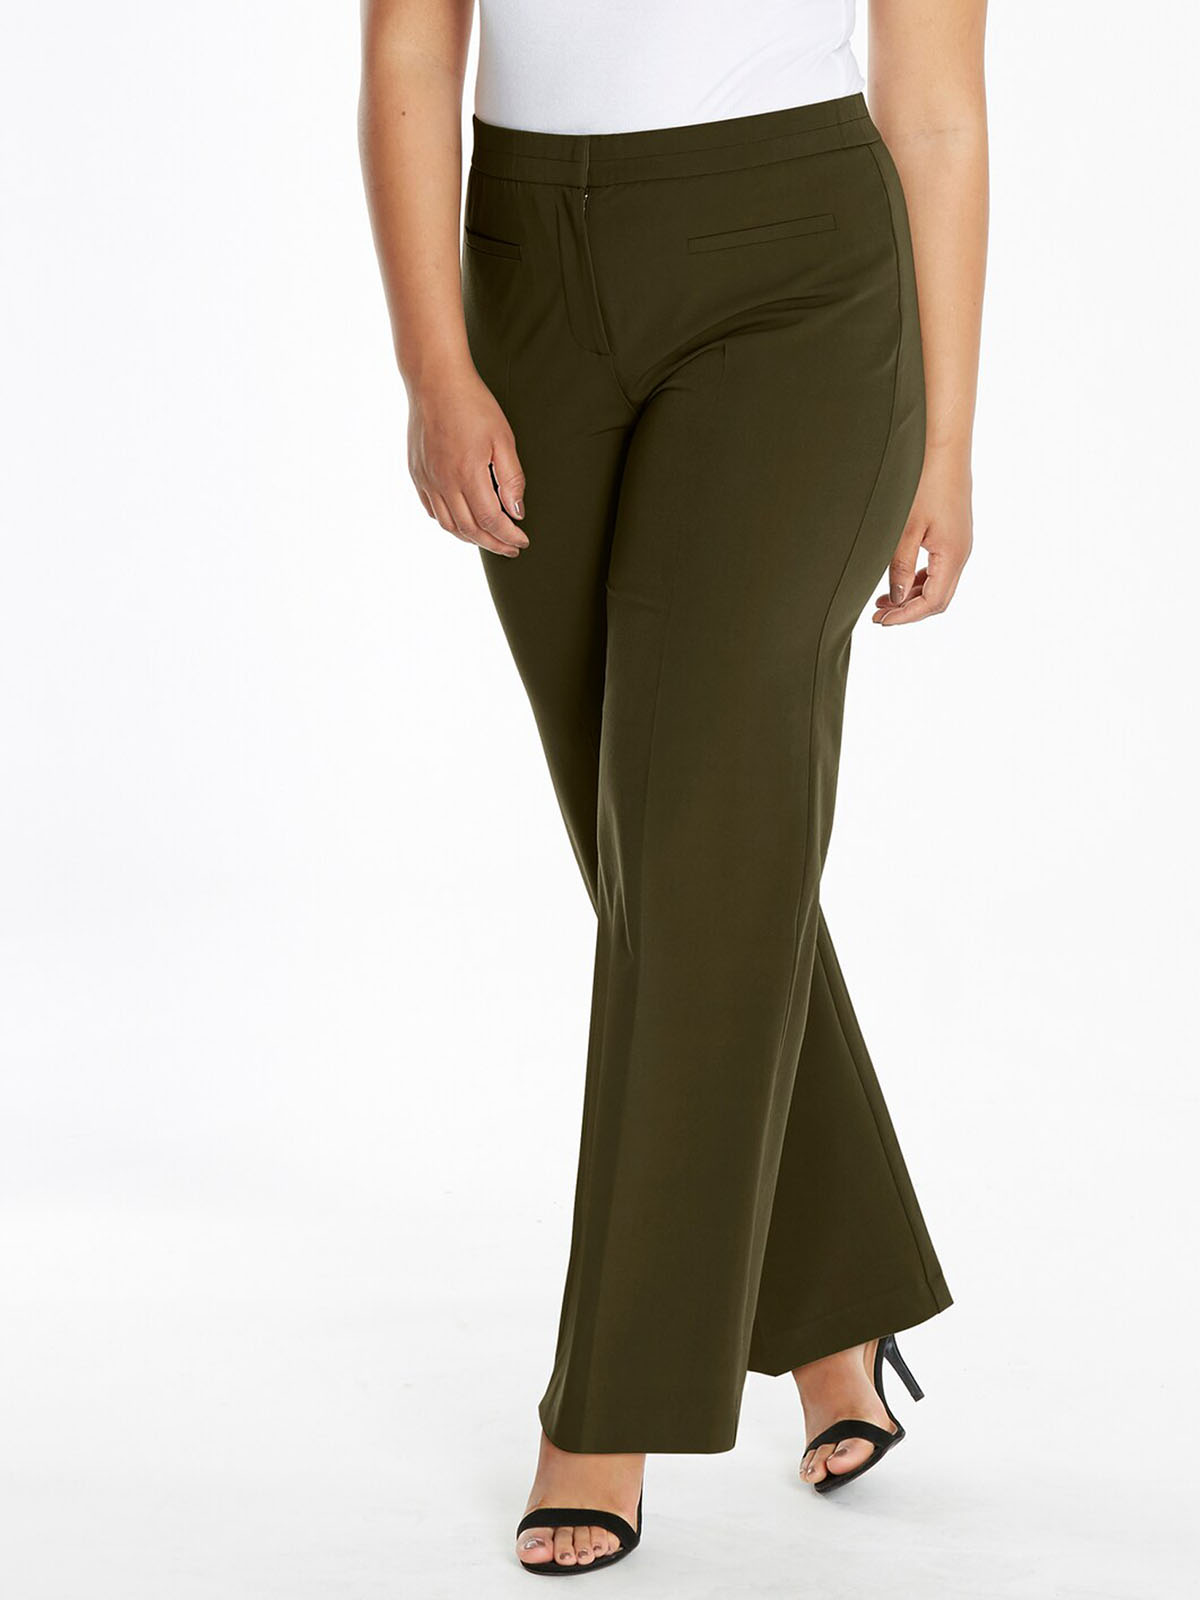 Wholesale Discount Plus Size Sportswear by Magisculpt and Magifit - - KHAKI  Wide Leg Tailored Trousers - Size 10 to 16